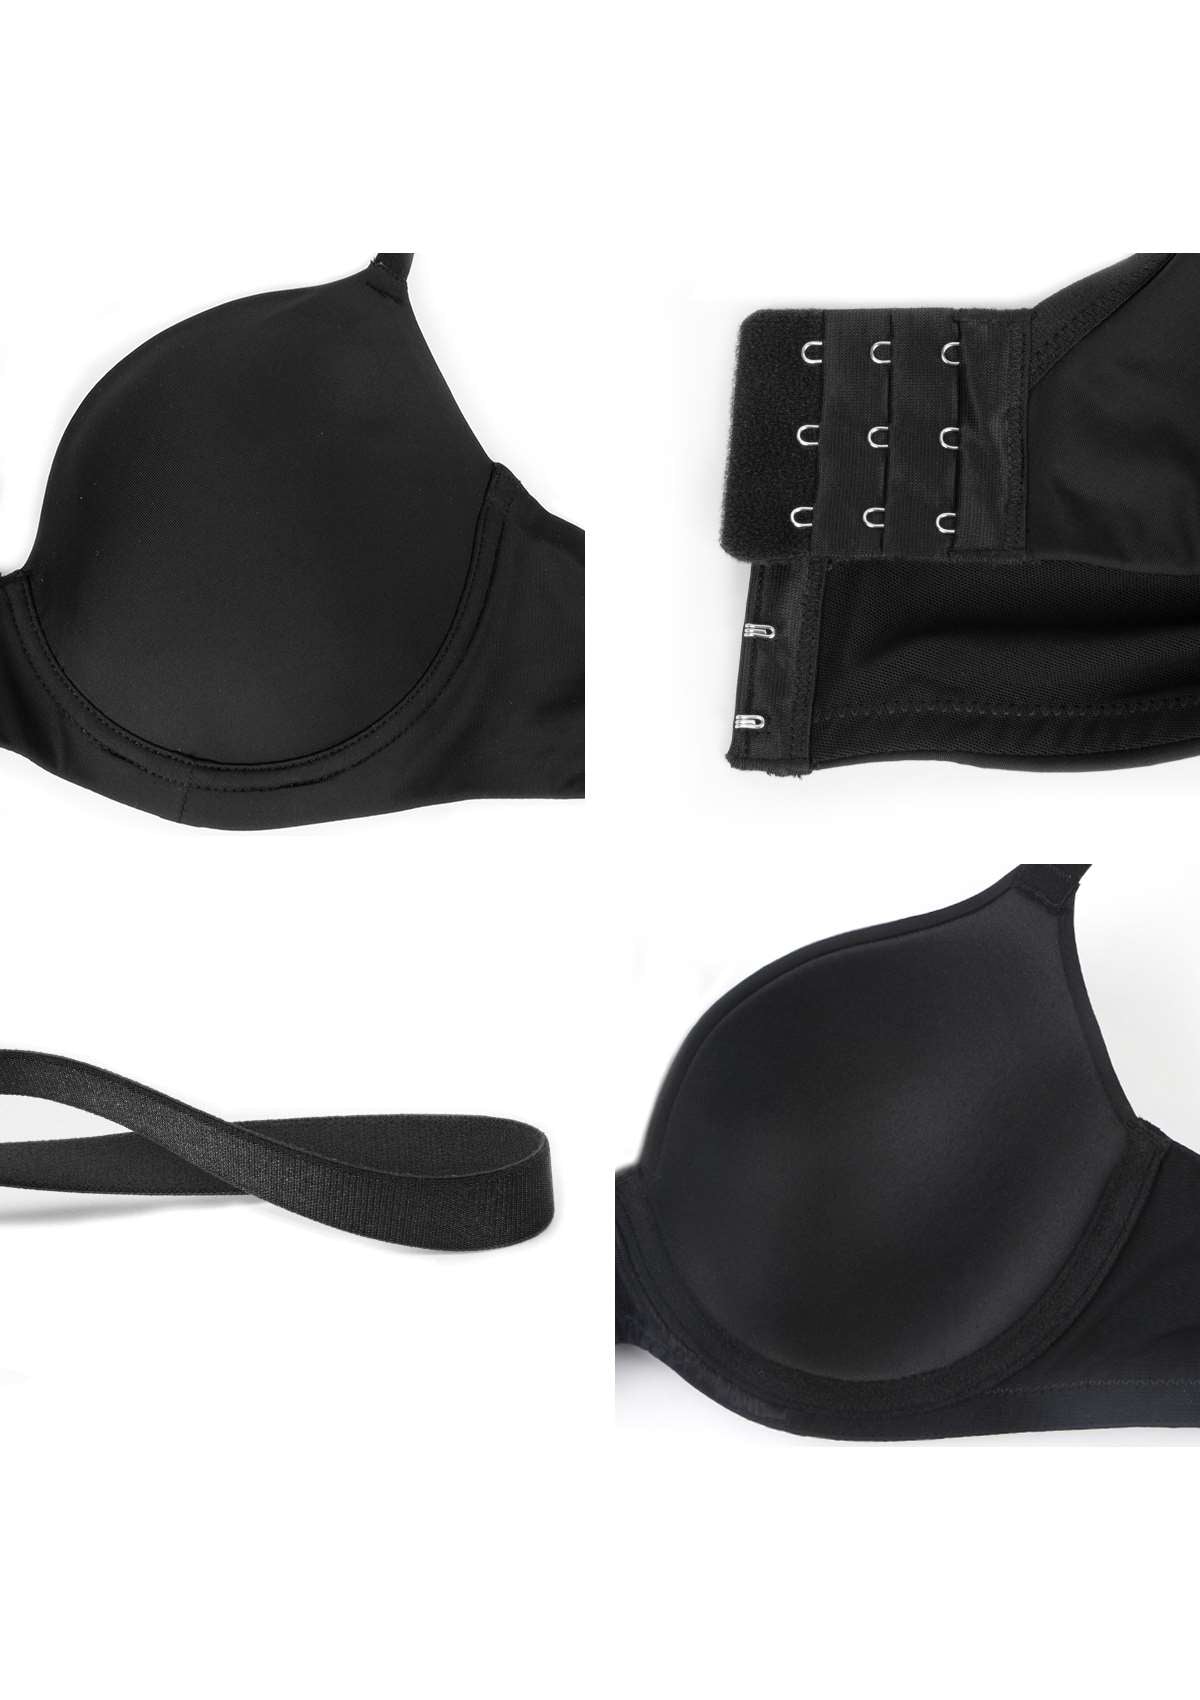 HSIA Gemma Smooth Padded T-shirt Everyday Bras - For Lift And Comfort - Black / 36 / C